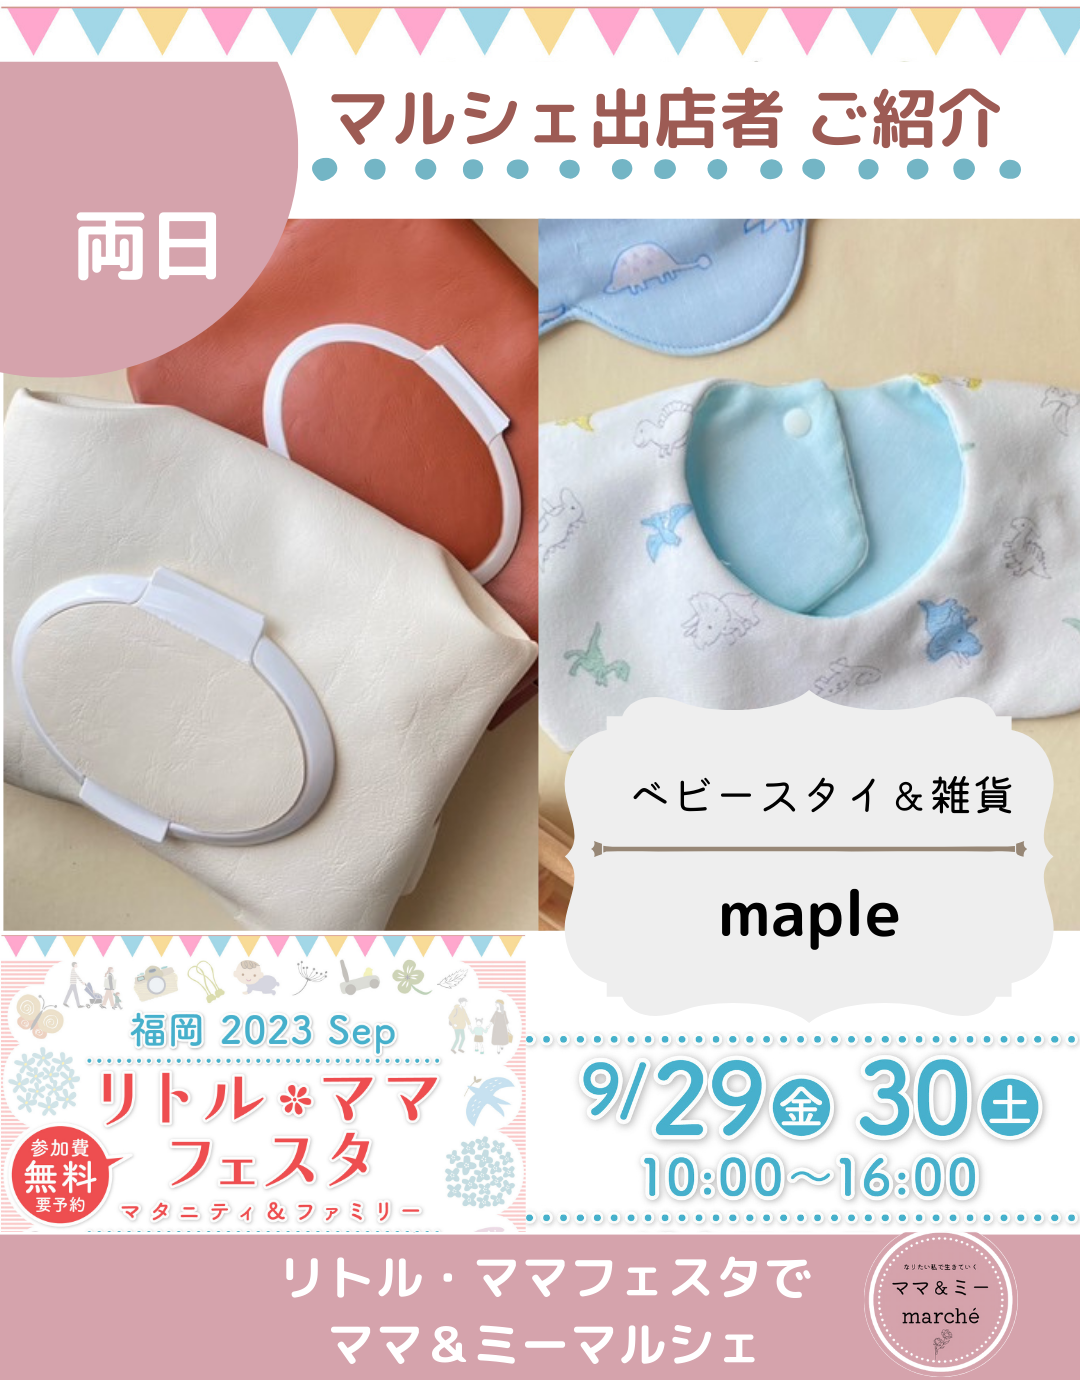 <div style=" font-size:14px; font-weight:bold;">【両日】maple</div> <div style=" font-size:10px;">ベビースタイ、ベビーキッズ雑貨販売</div>